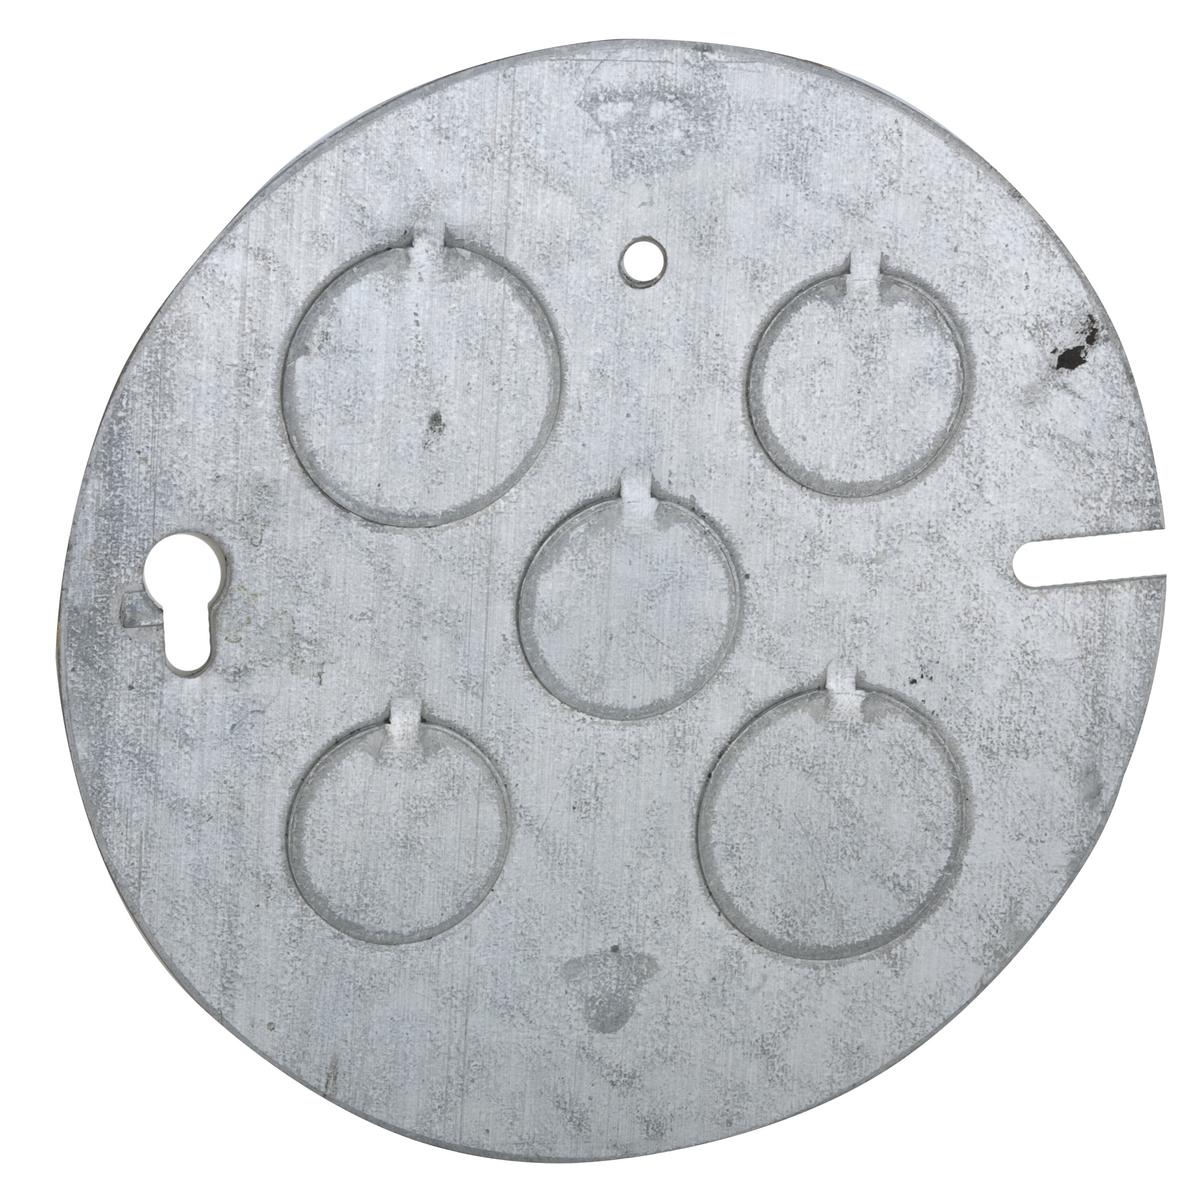 Hubbell 890 Concrete Ring Cover, Flat, Three 1/2 in. and Two 3/4 in. KO's, 4-1/2 in. Dia. O.D. 